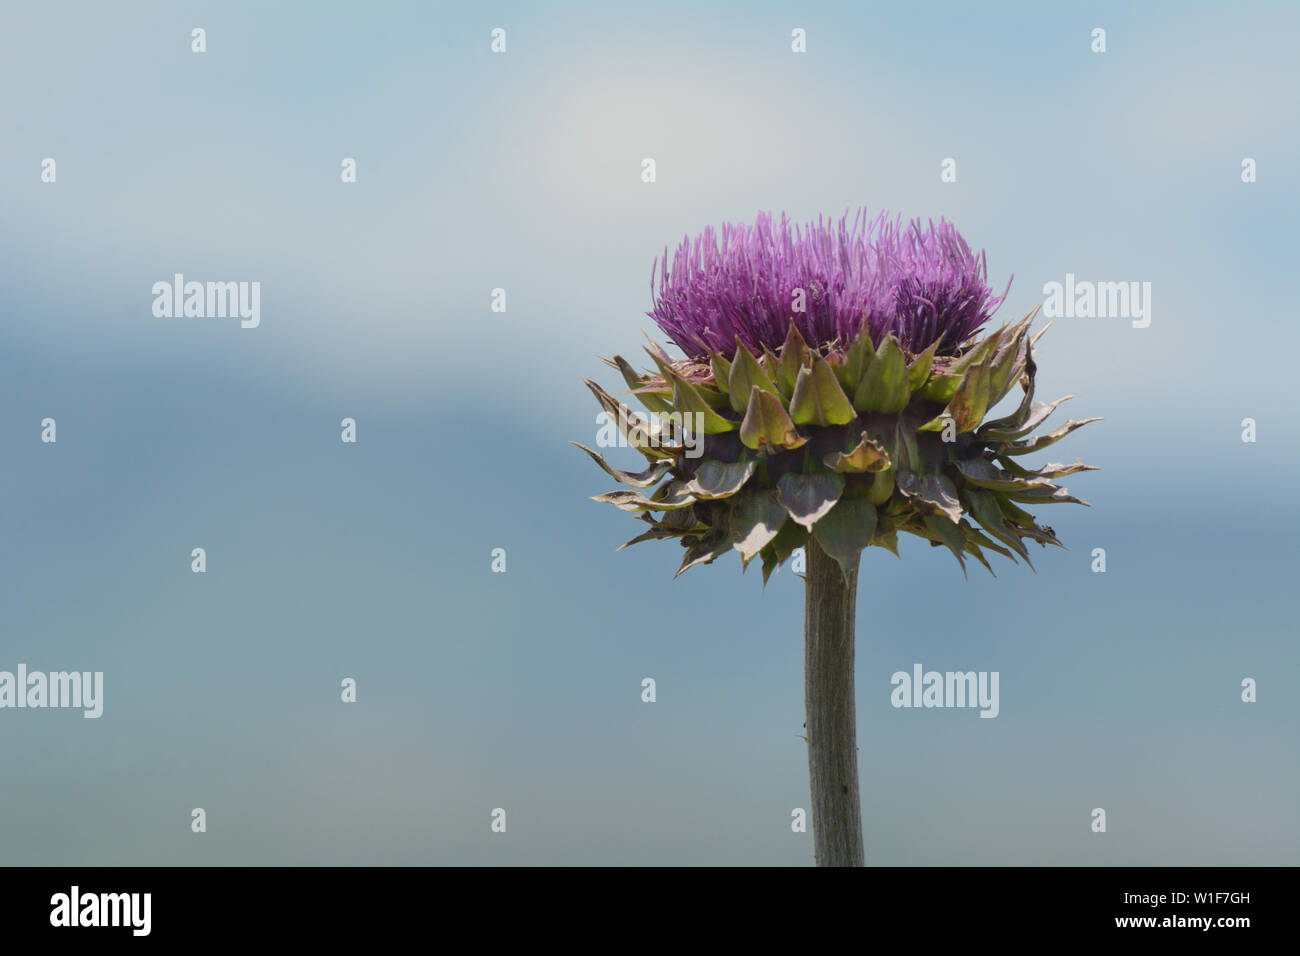 Purple musk thistle flower or carduus nutans against blurred background of Rocky Mountains with clouds Stock Photo